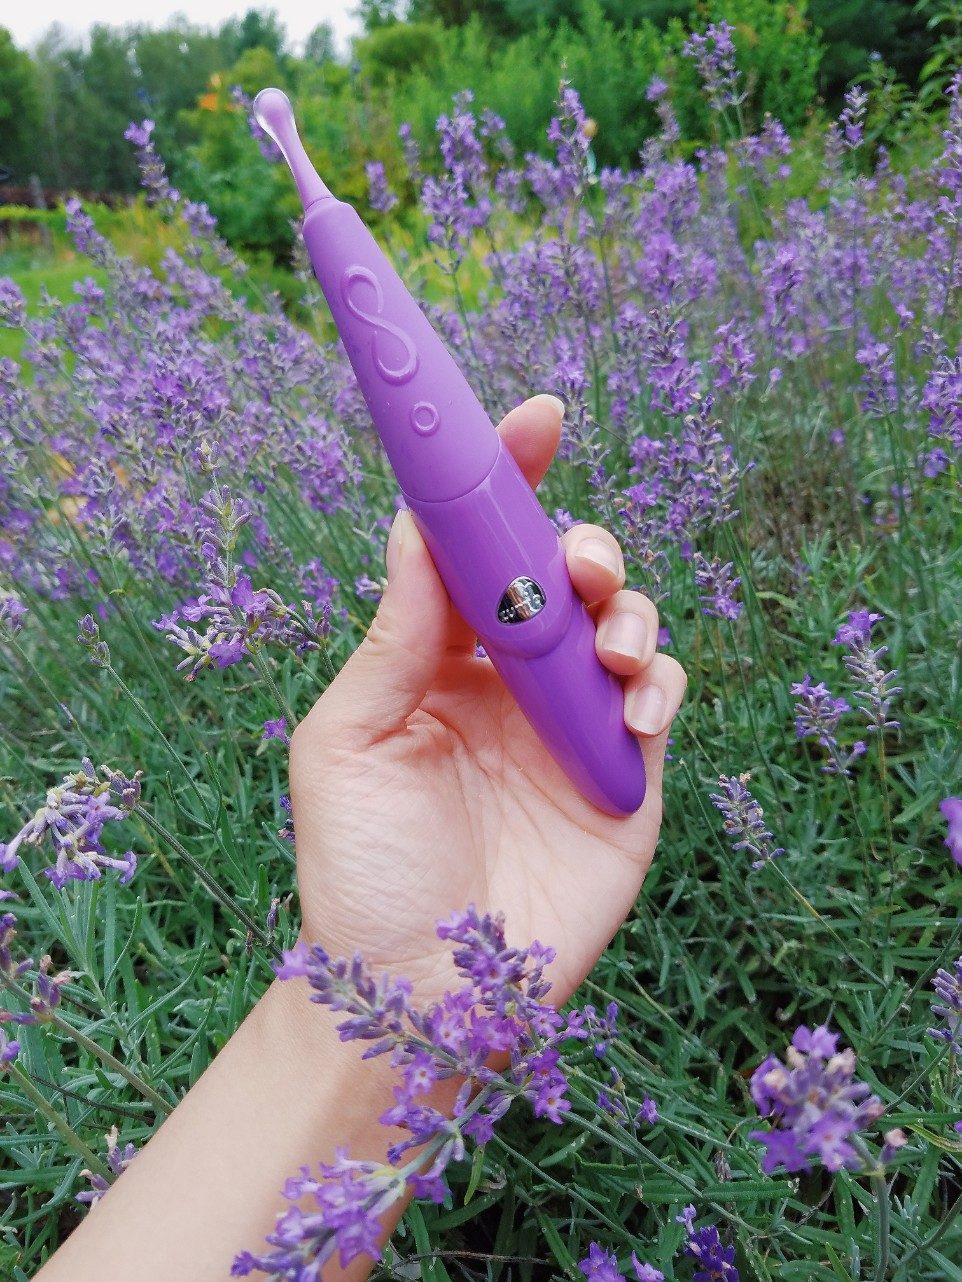 [Image: holding the Zumio S Caress in my hand. It is a light lavender purple with a clear silicone coating on the tip to make it more gentle than the original Zumio.]